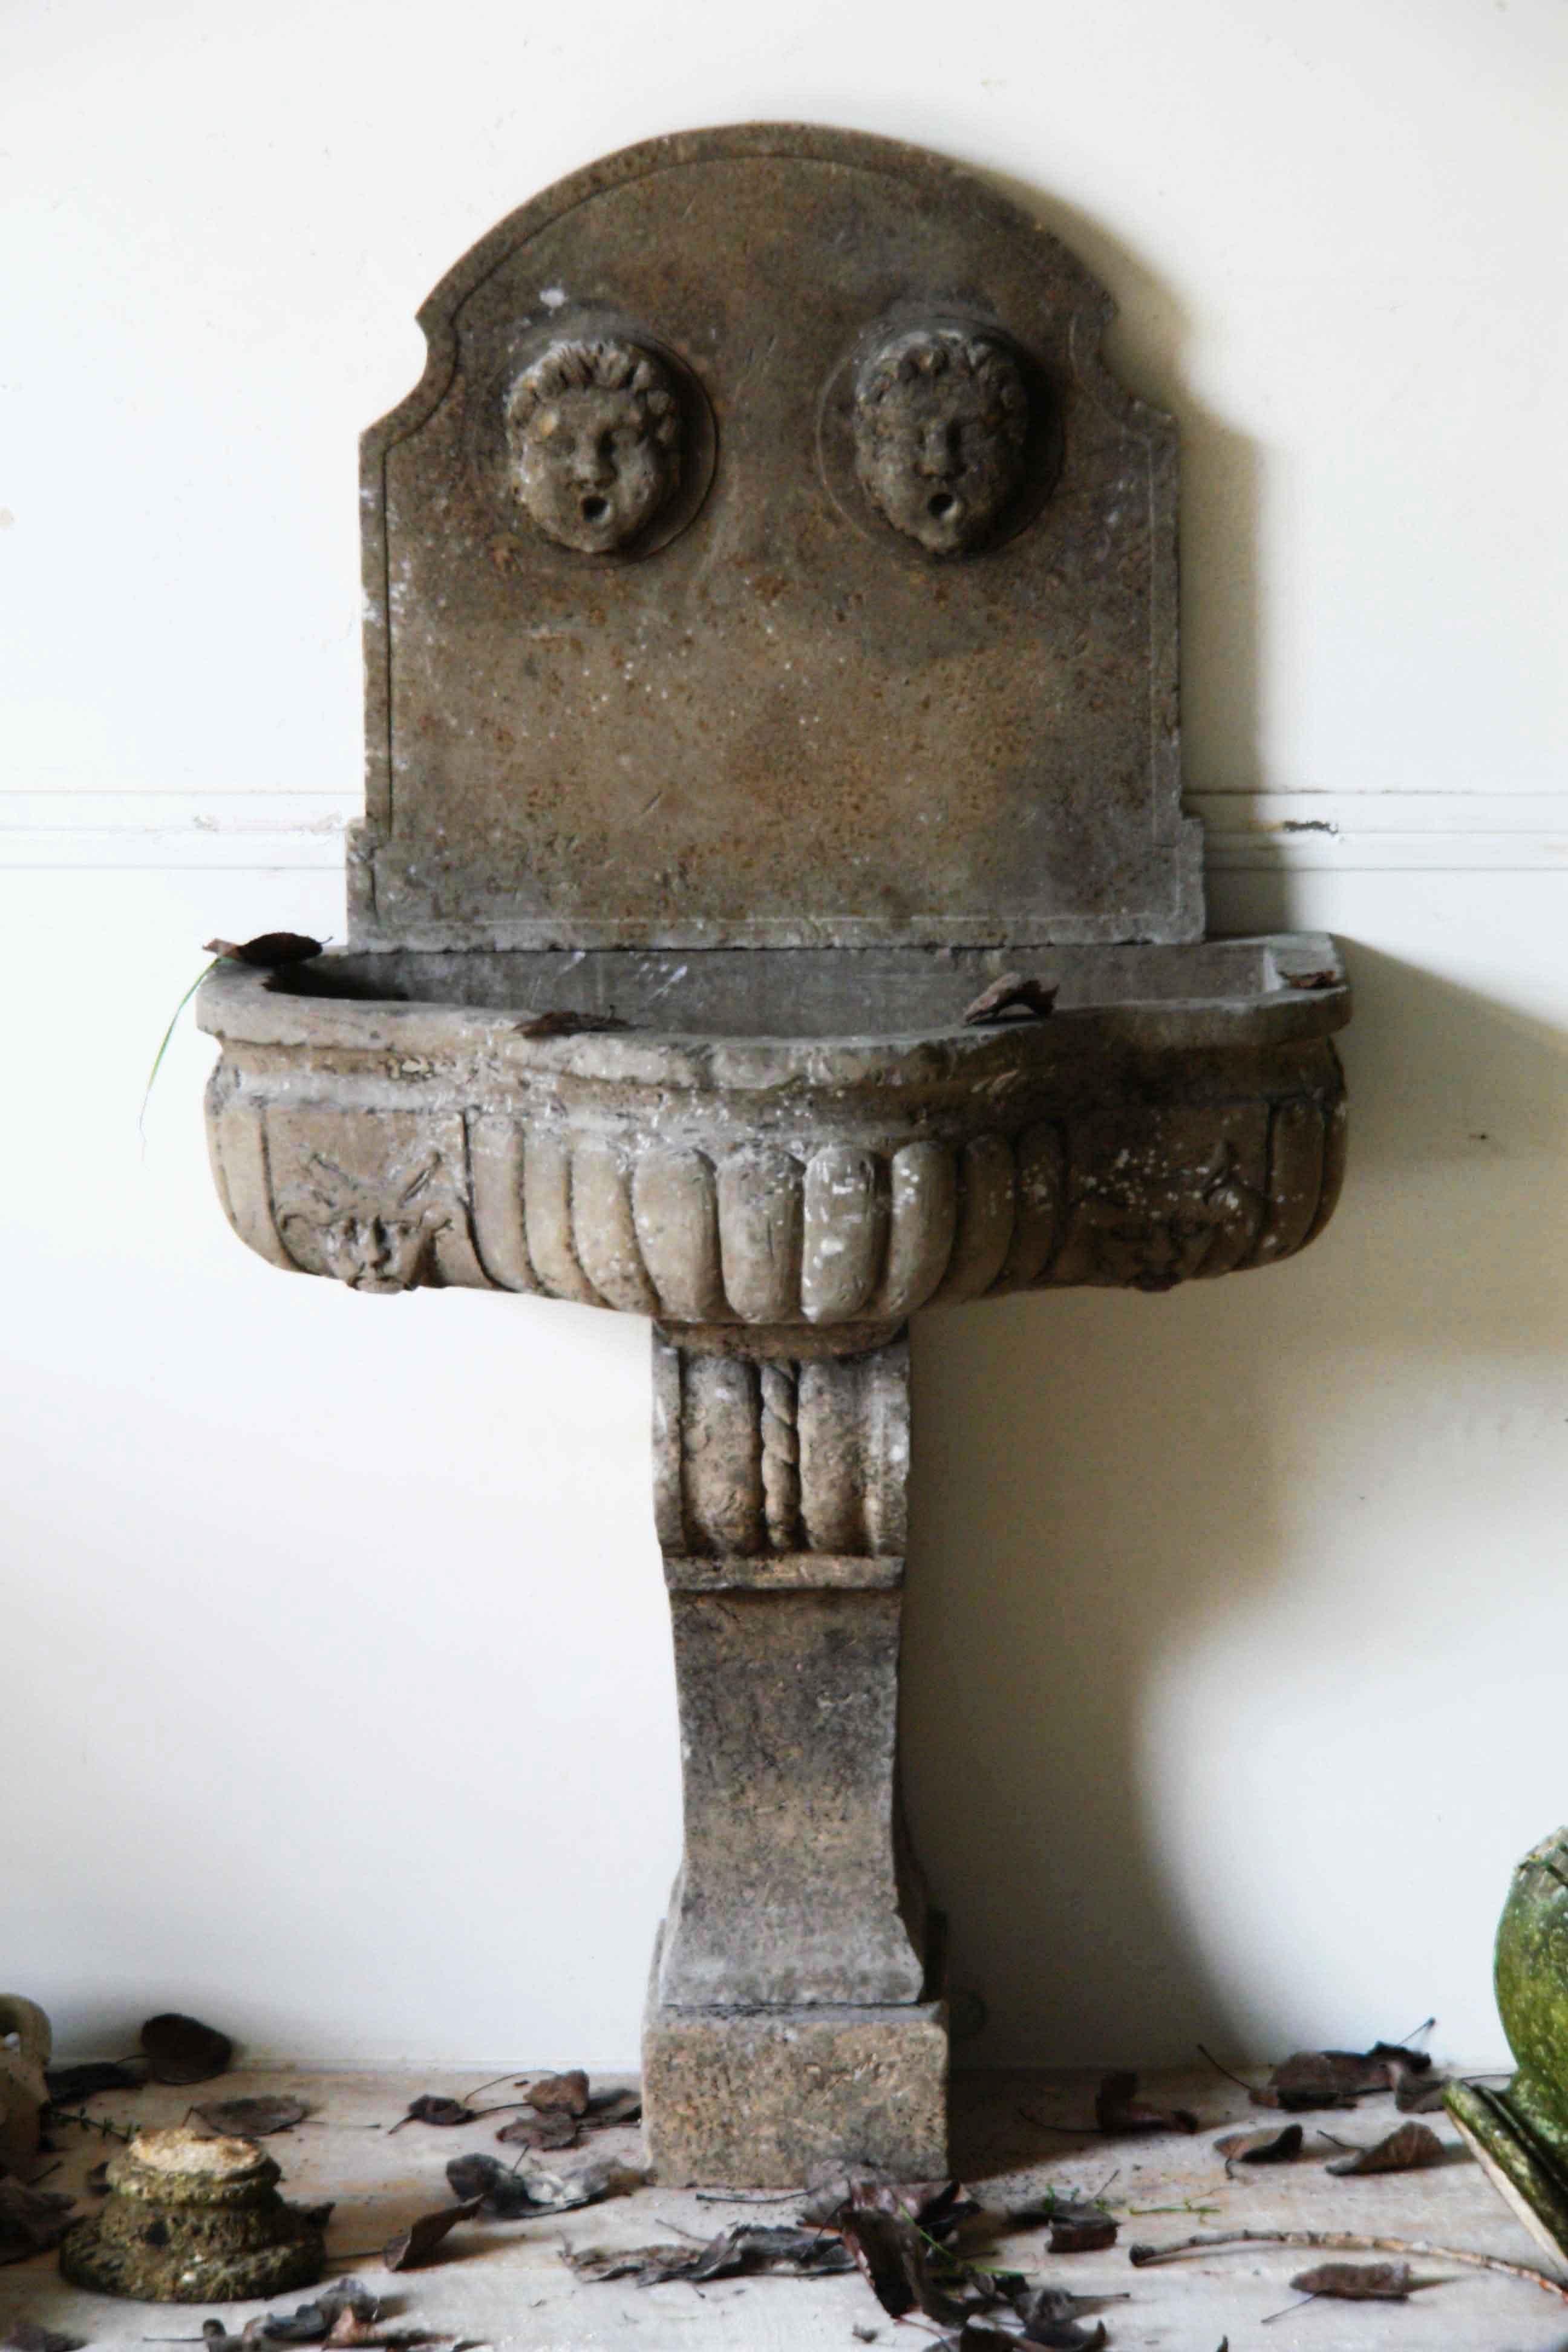 Italian Renaissance style two angel’s heads water fall fountain, hand-carved in pure limestone, hand-finishing and antique patina with tradition, excellent quality of art work.
Ready for installation and to use as it is.
More info on demand.
